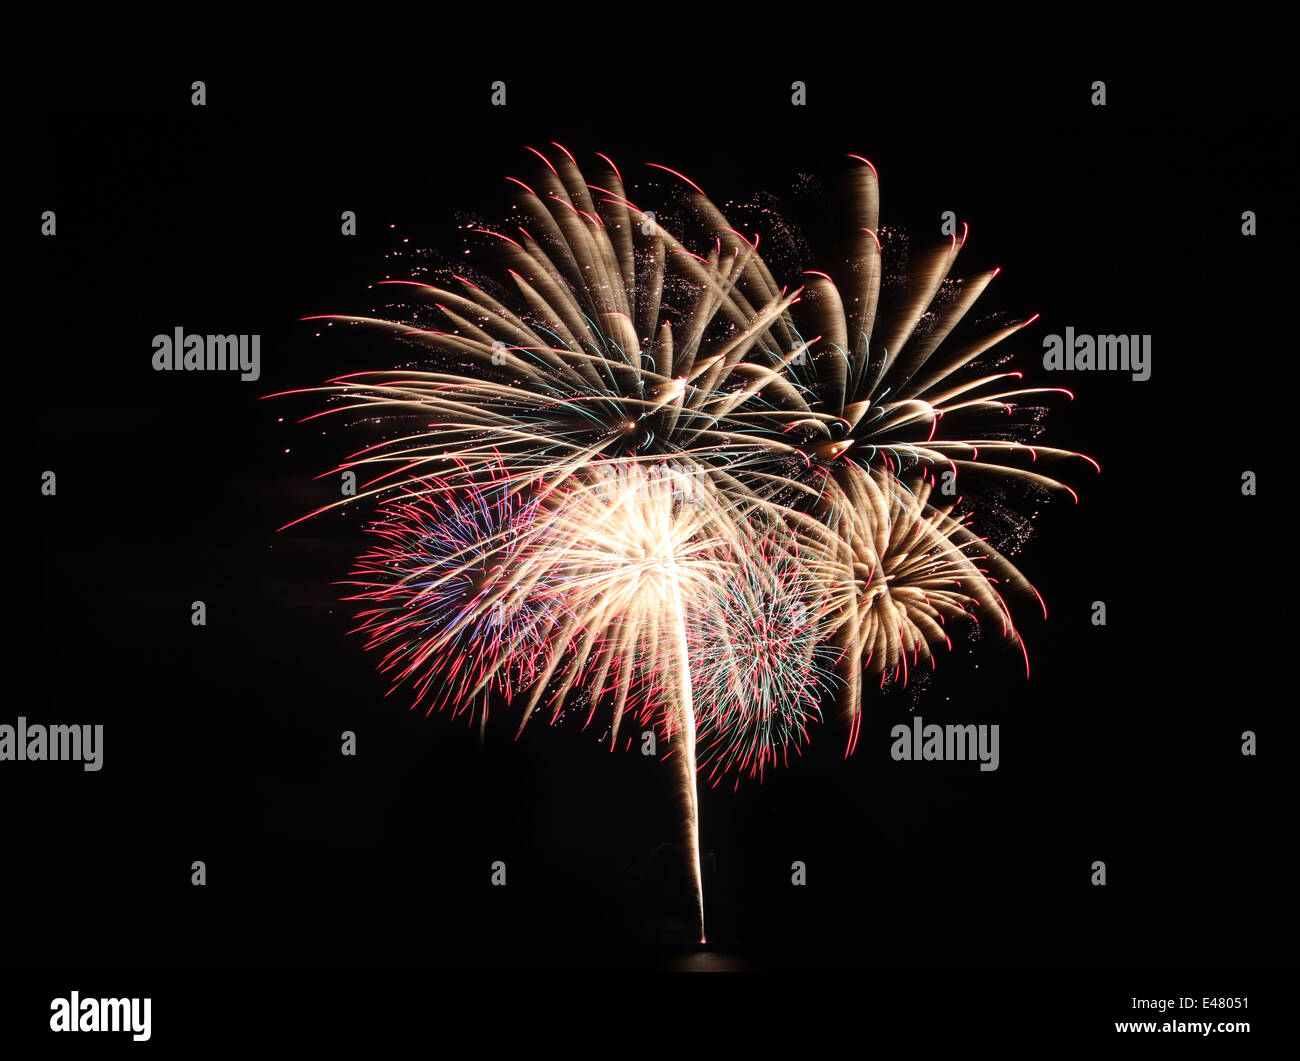 Fireworks or firecracker in the darkness background. Stock Photo